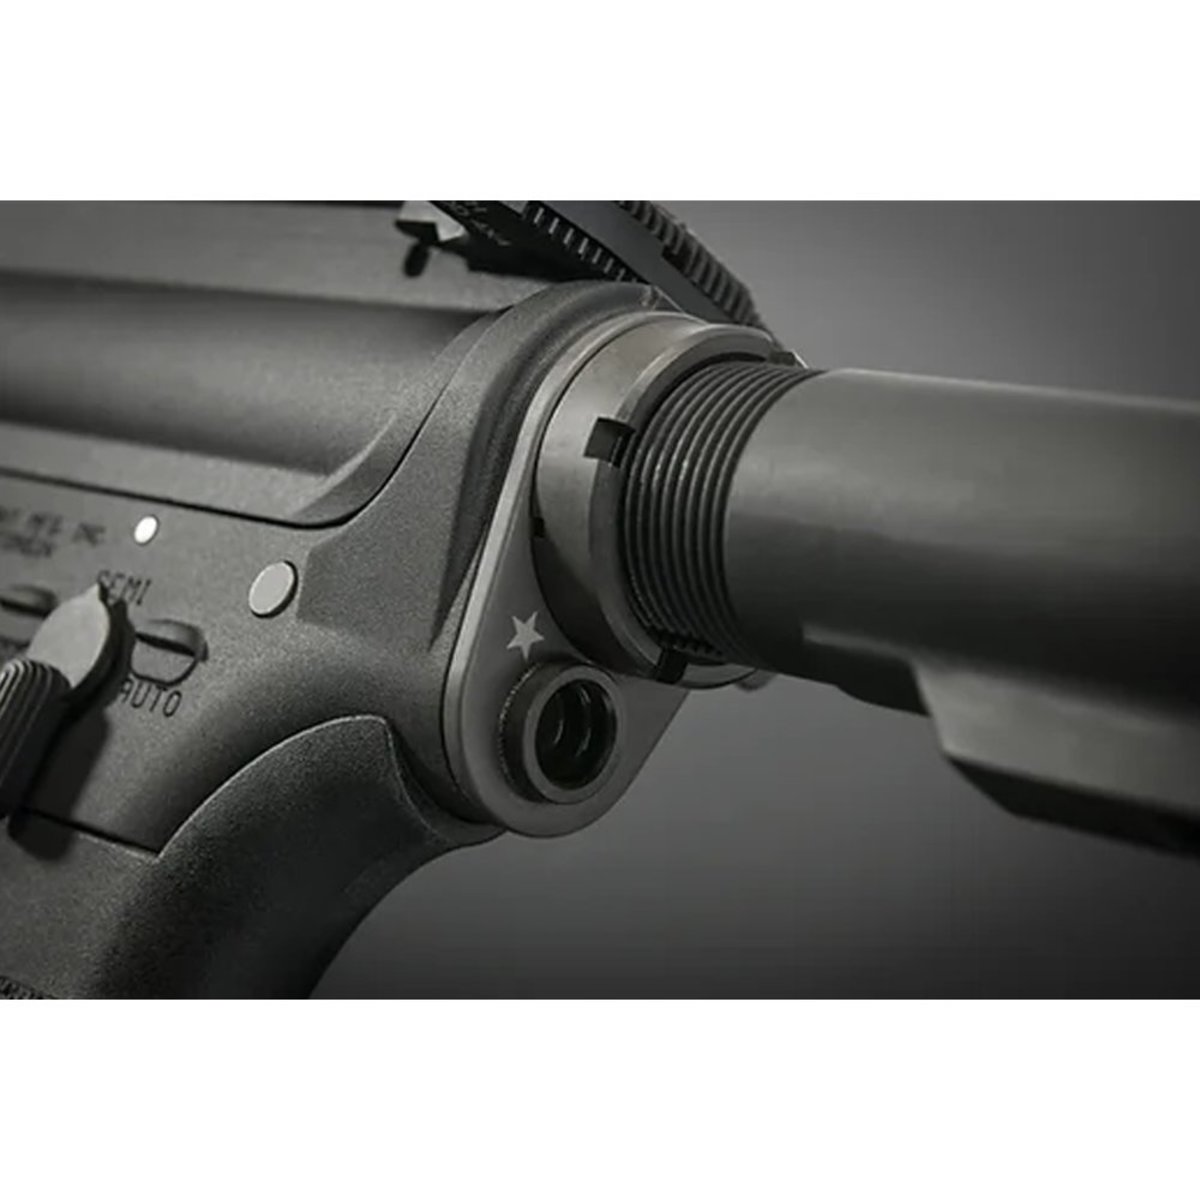 Bcm Mcmr Gunfighter 11.5" Deluxe Edition Aeg Rifle